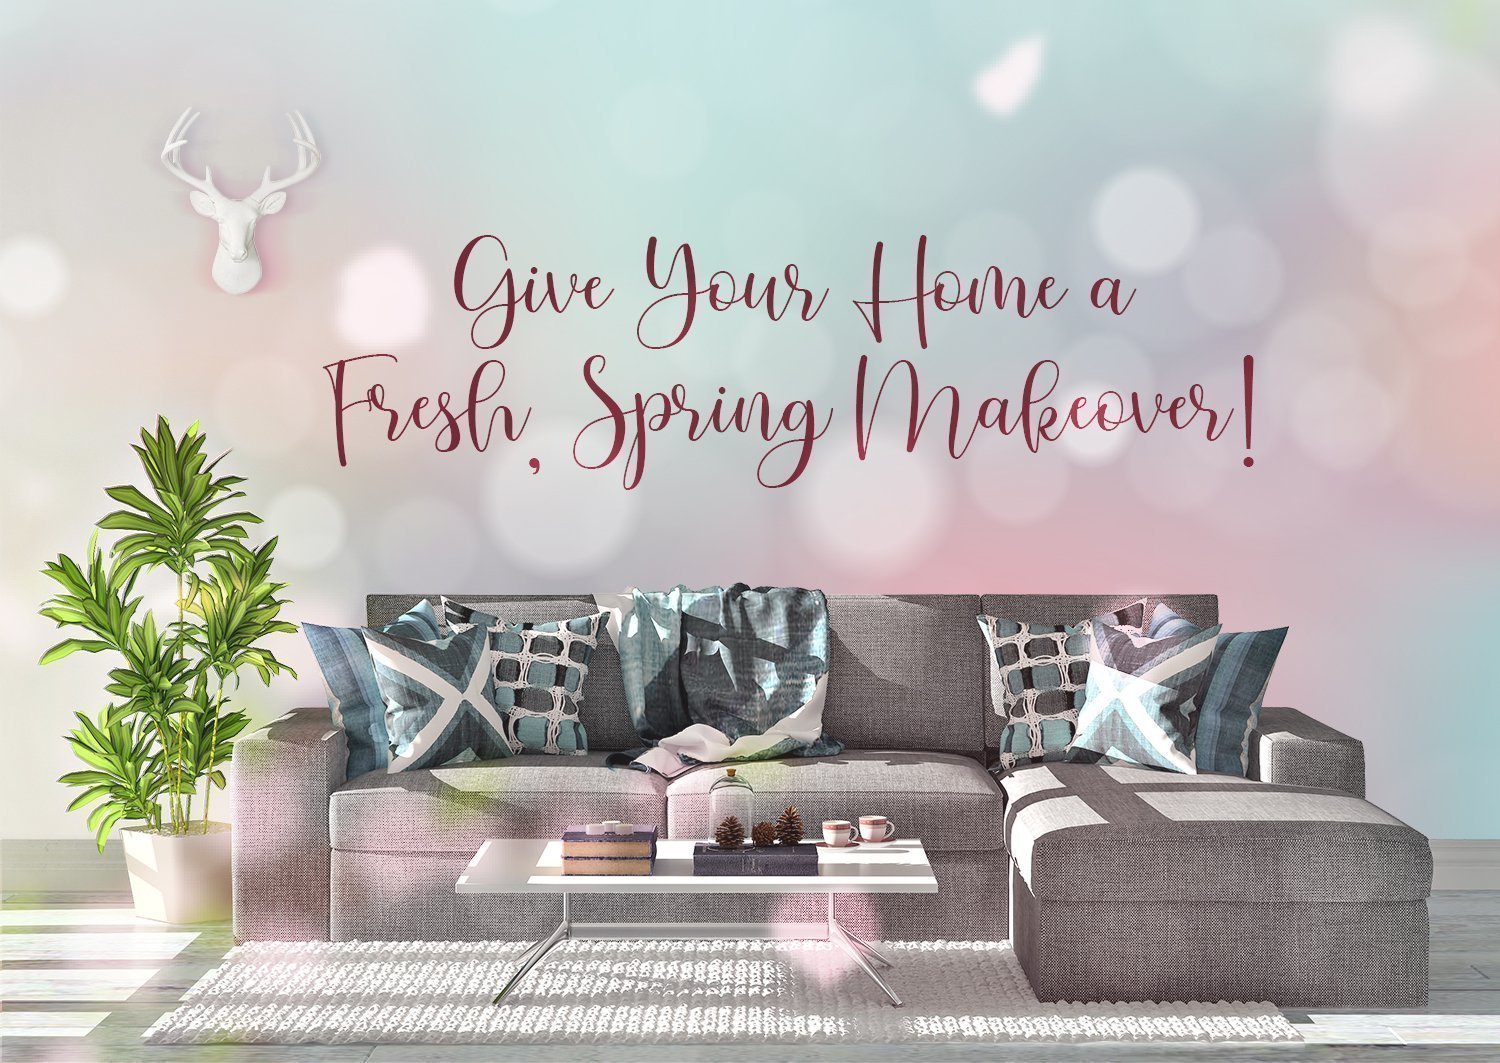 It's amost Springtime! Give your home a Fresh, Spring Makeover!!